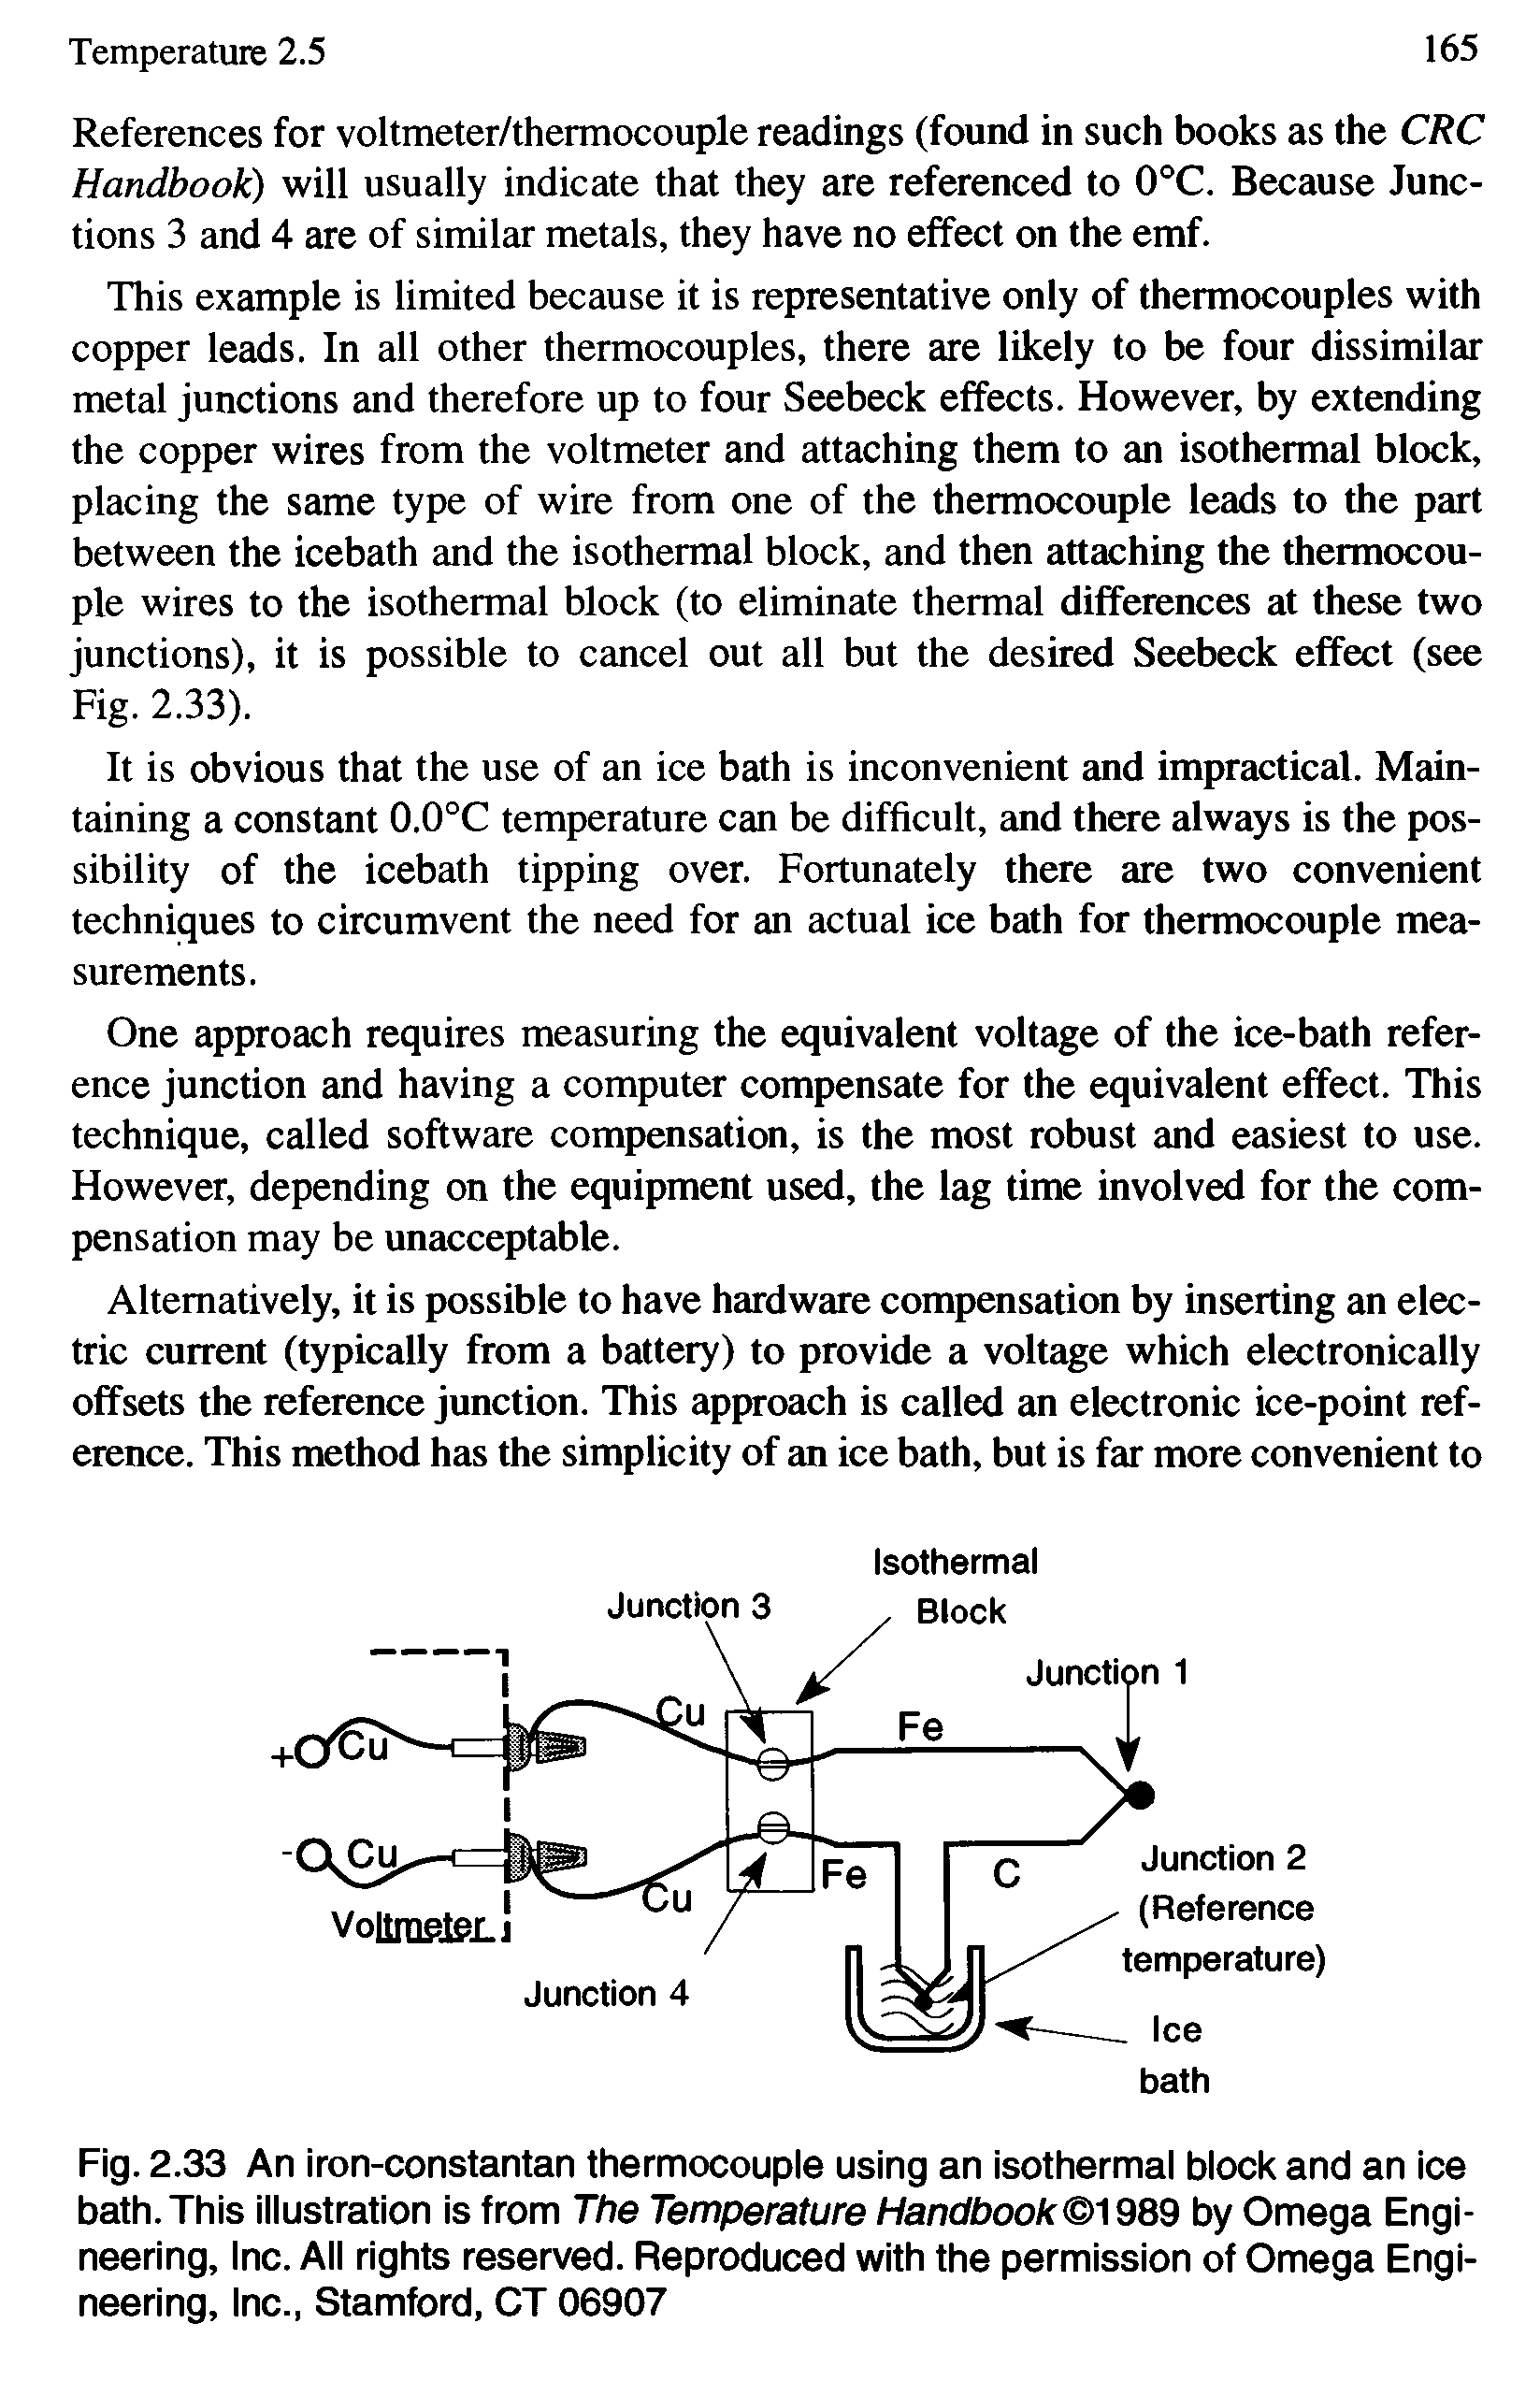 Fig. 2.33 An iron-constantan thermocouple using an isothermal block and an ice bath. This illustration is from The Temperature Handbook 1989 by Omega Engineering, Inc. All rights reserved. Reproduced with the permission of Omega Engineering, Inc., Stamford, CT 06907...